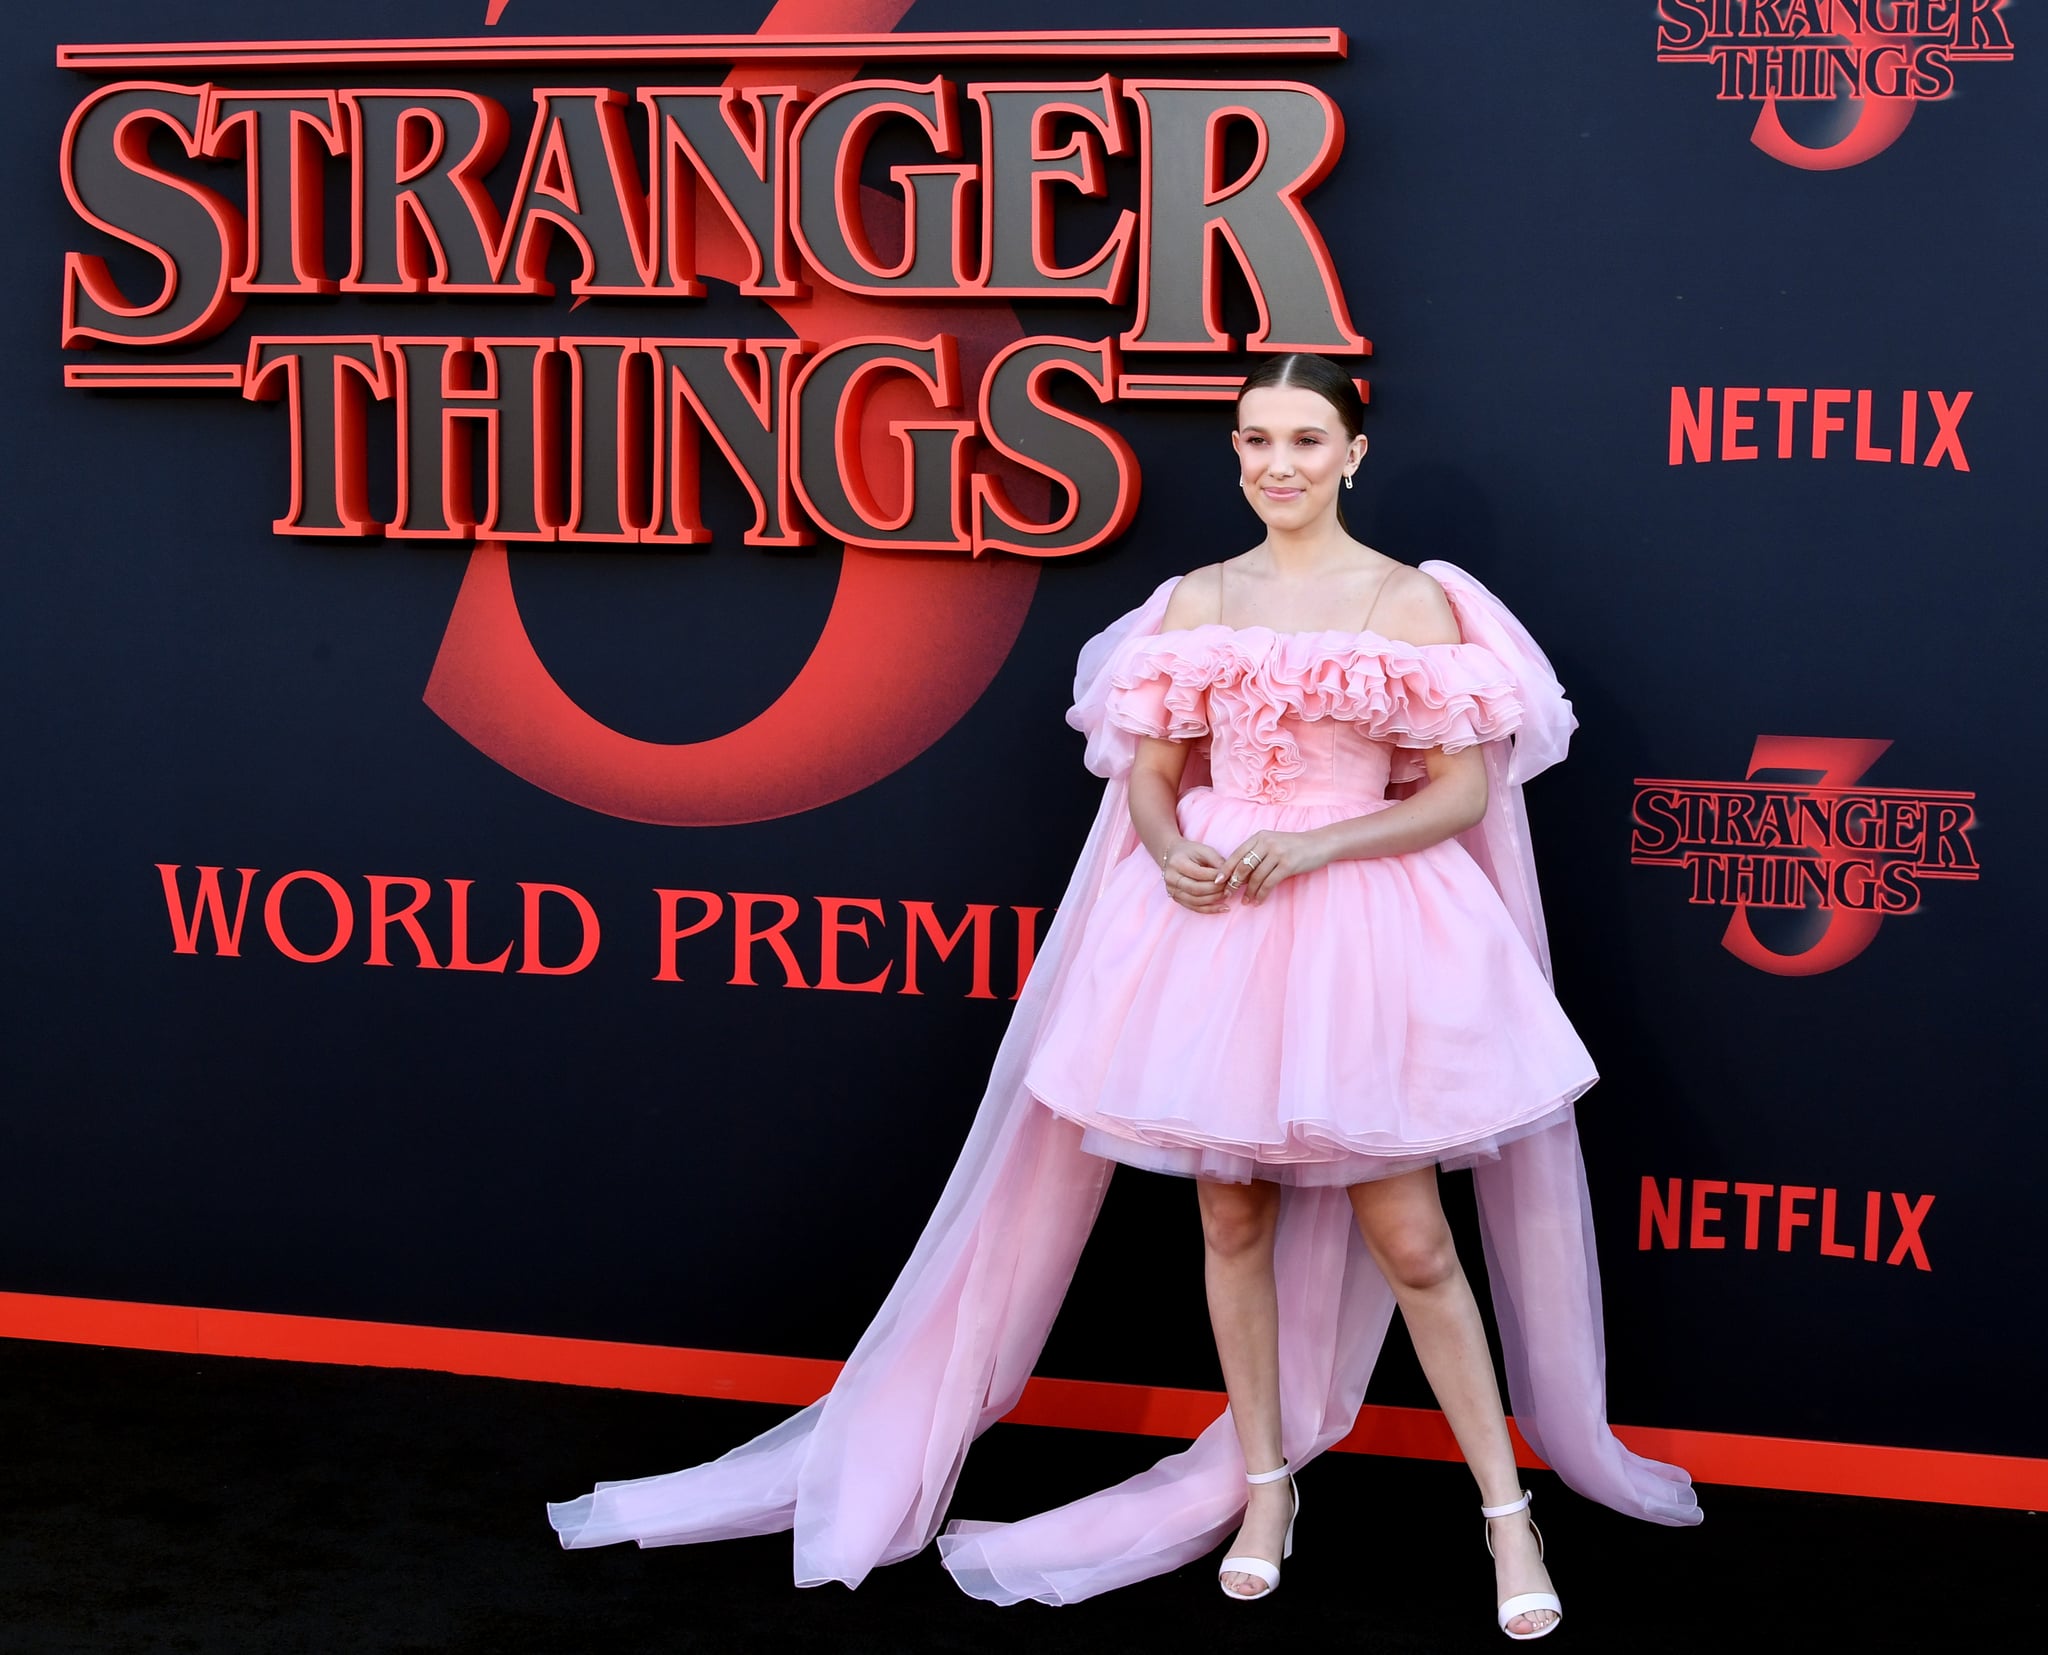 Stranger Things 3': All About Millie Bobby Brown's Costumes